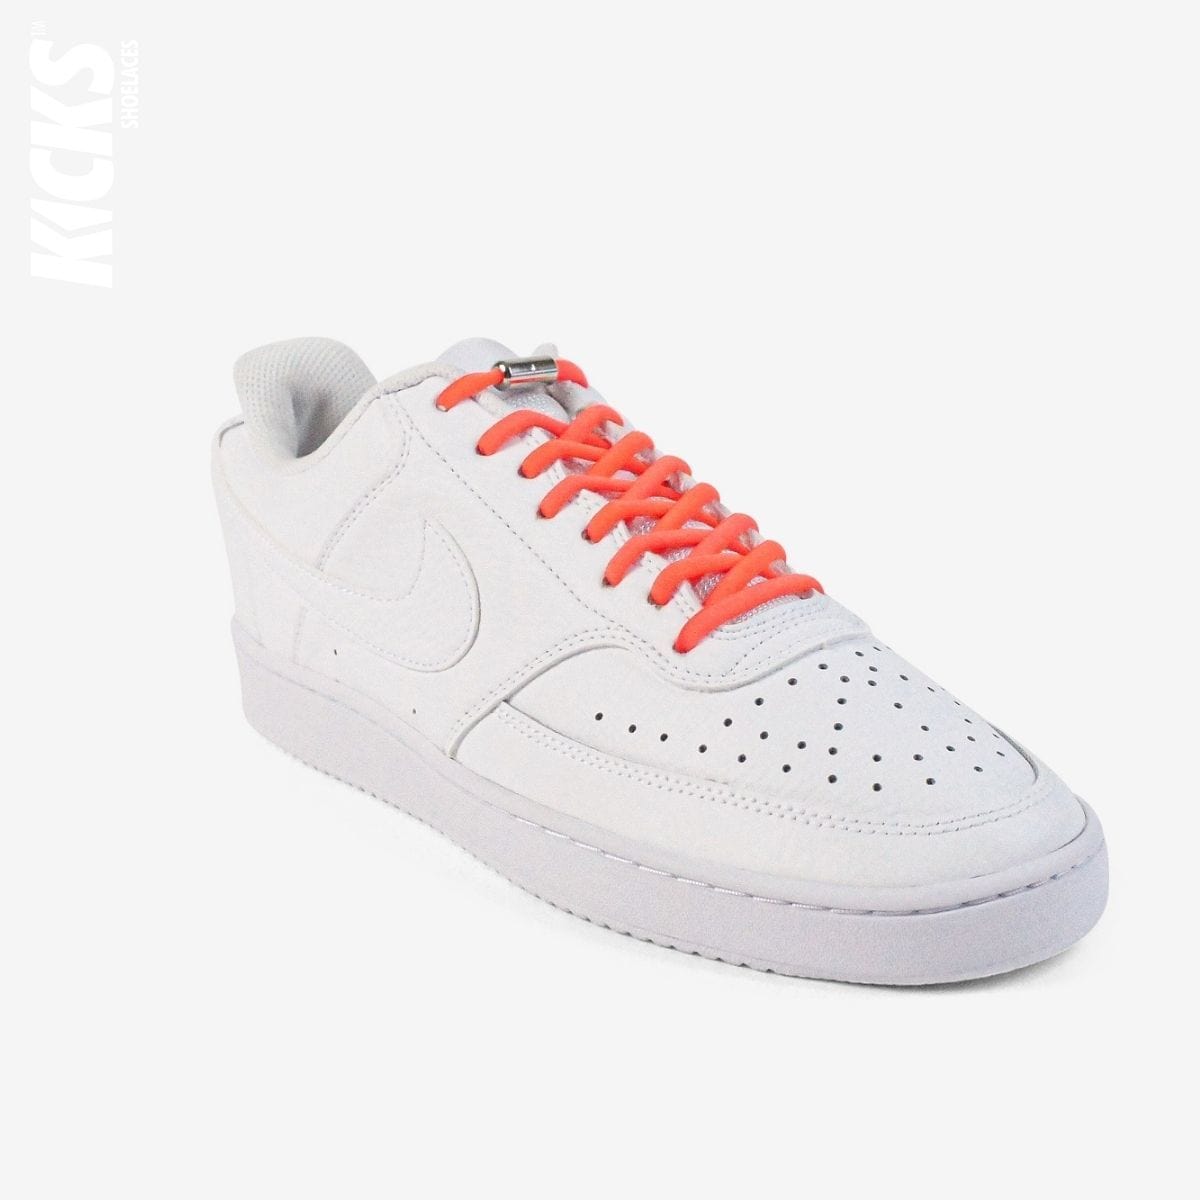 round-no-tie-shoelaces-with-fluorescent-red-laces-on-nike-white-sneakers-by-kicks-shoelaces